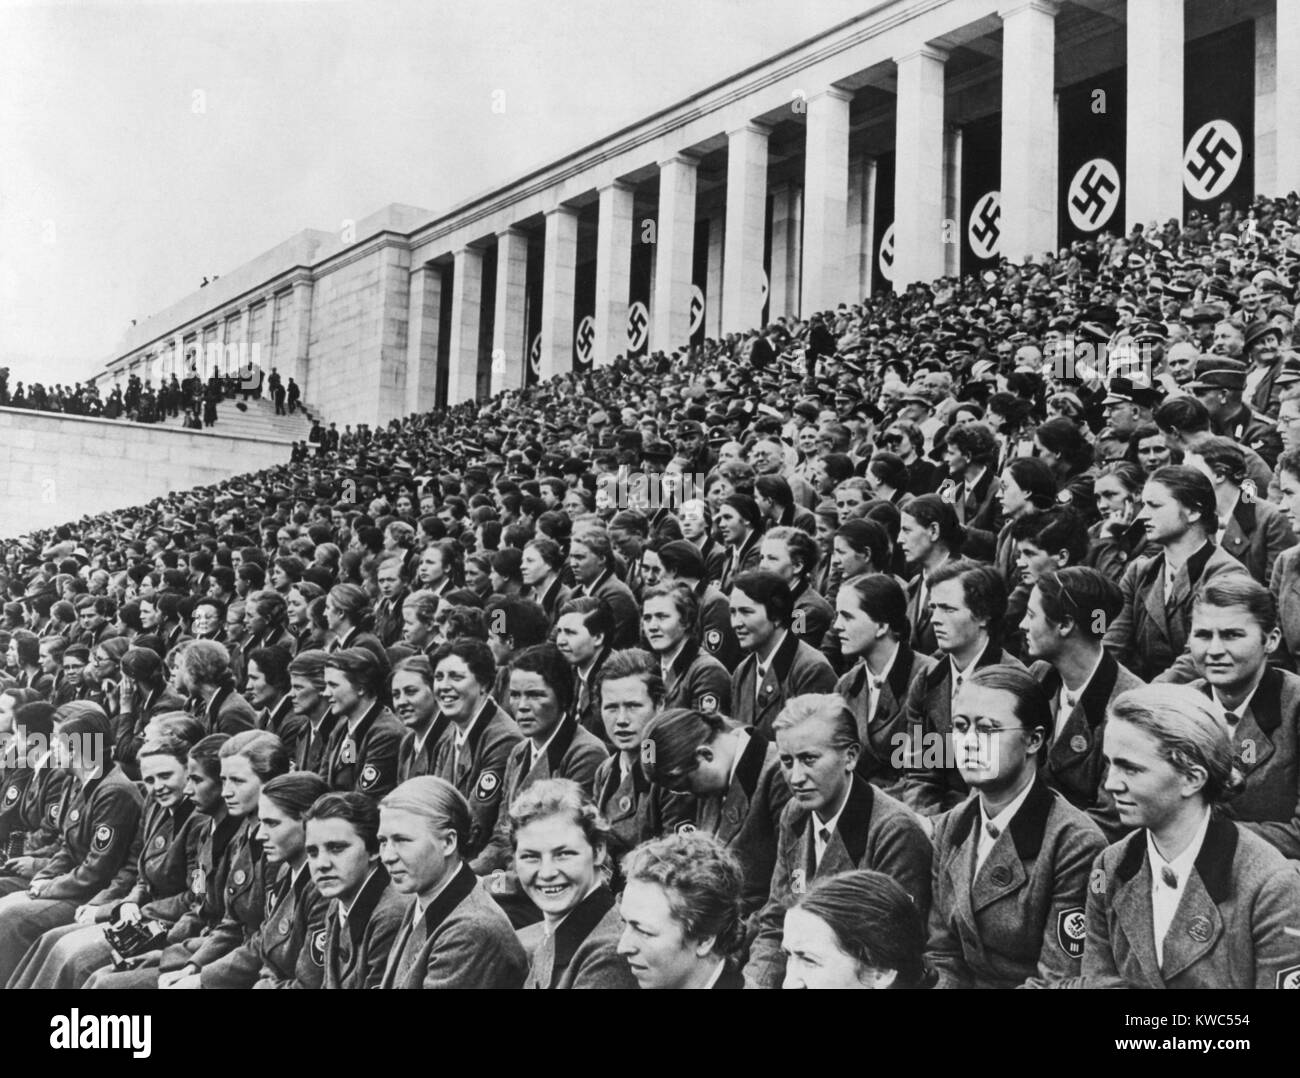 Uniformed young women with Nazi insignia in the Zeppelin Grandstand at Nuremberg. The stadium was on the Nazi Party Rally Grounds designed by Hitler's architect, Albert Speer. Ca. 1937-1940. (BSLOC 2015 13 51) Stock Photo